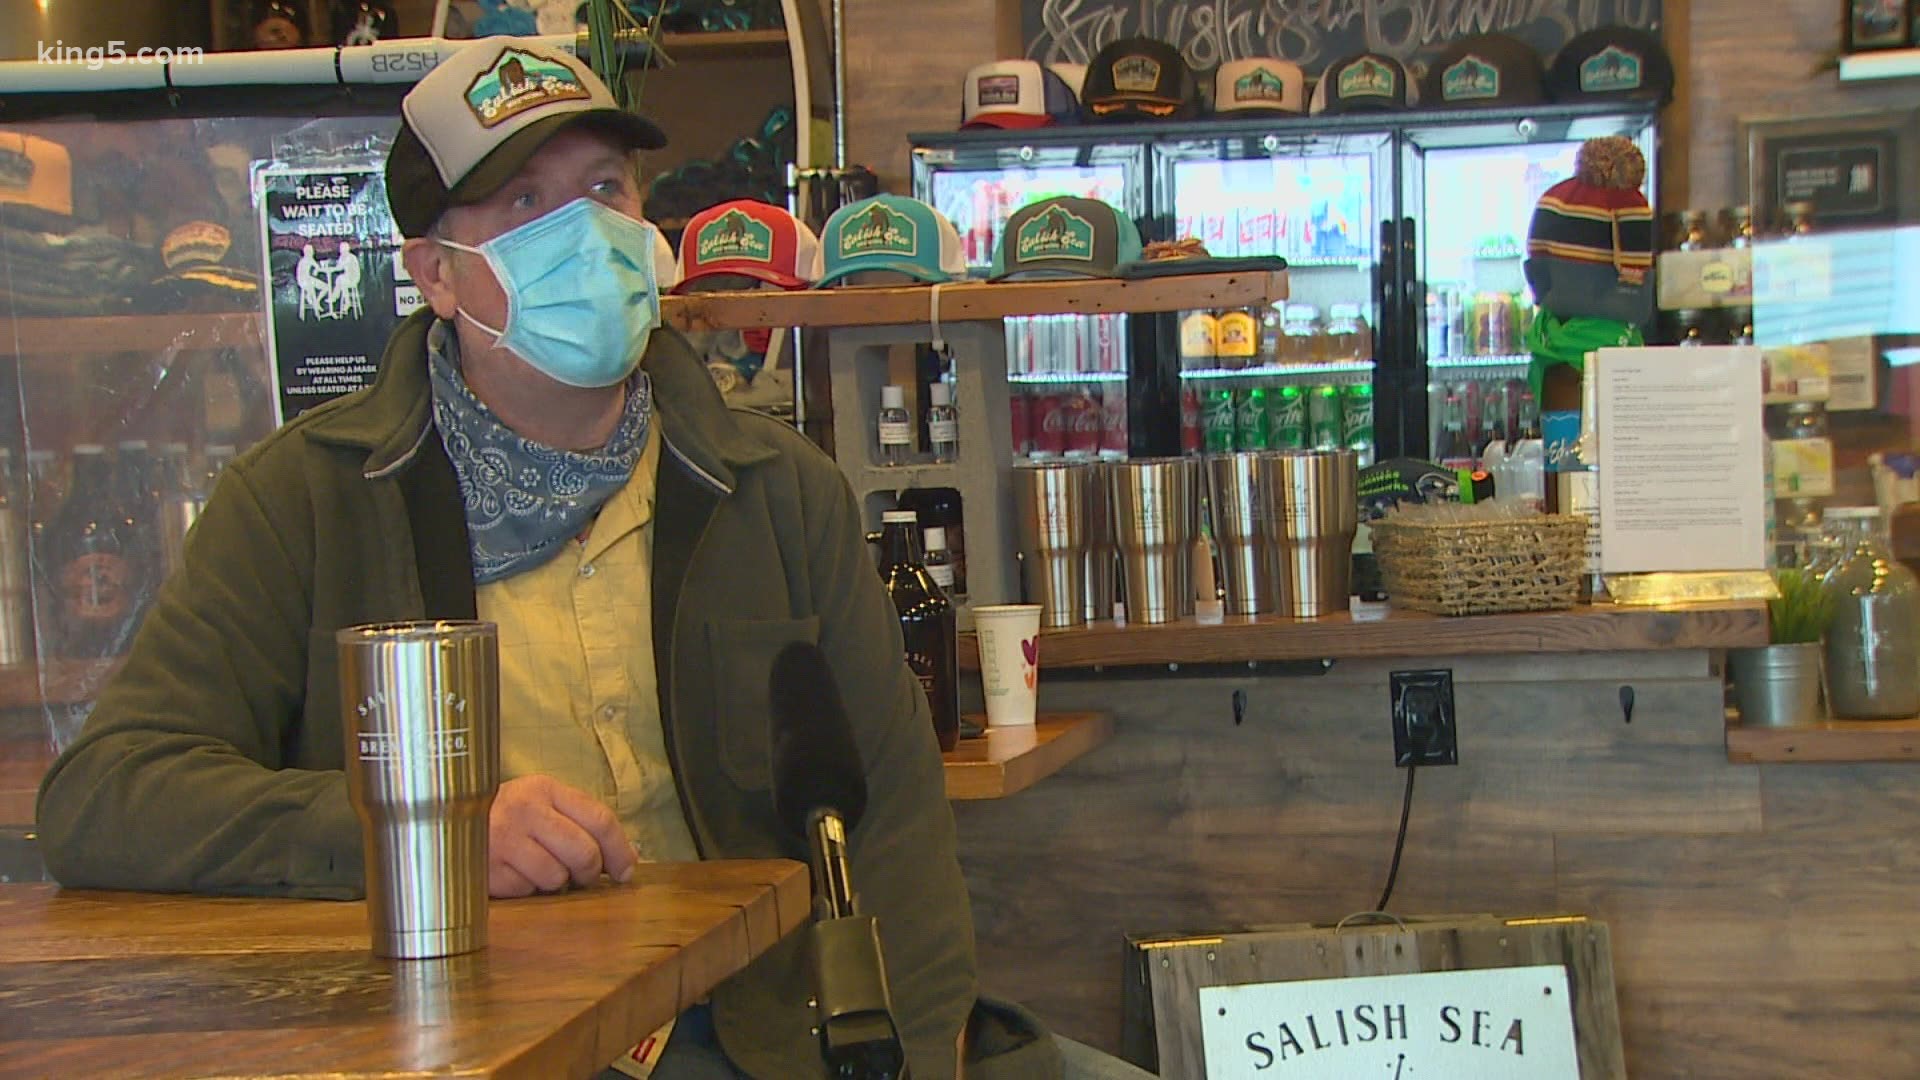 With news of restrictions on bars and restaurants, the owner at Salish Sea Brewing was forced to lay off four of his 18 employees.